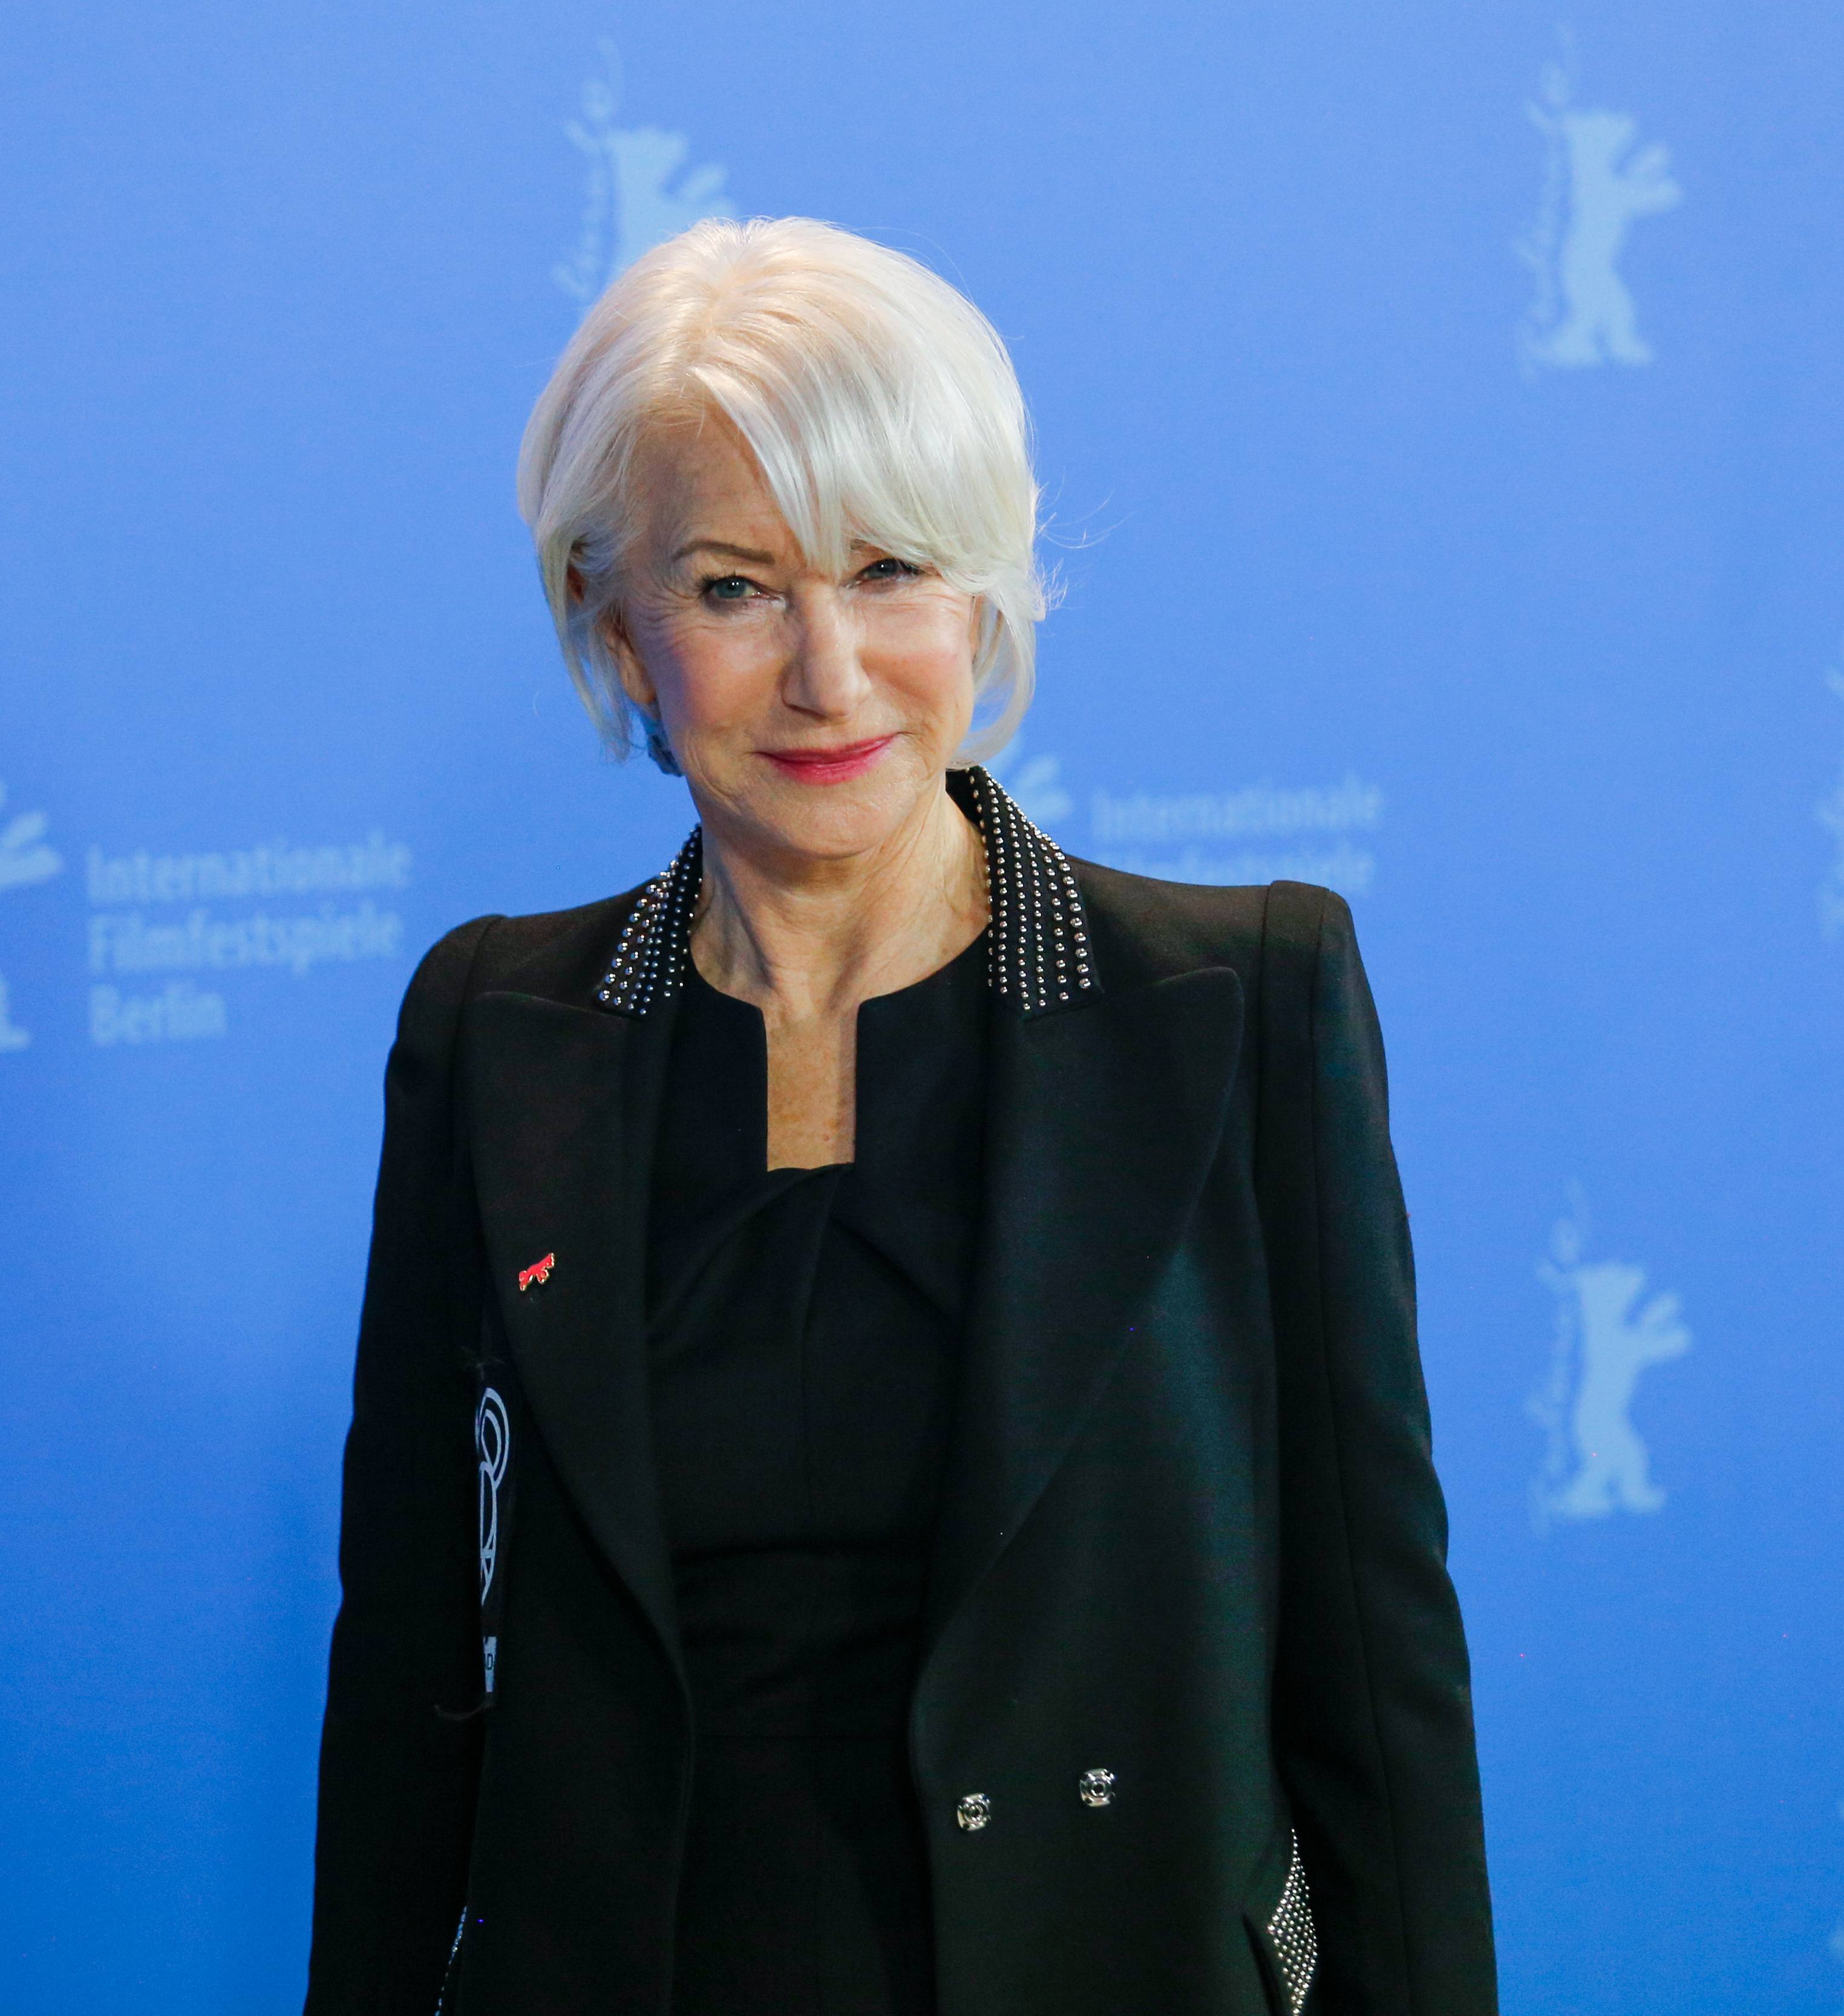 Dame Helen Mirren, recipient of Honorary Golden Bear pose during a photo call during 70th Berlinale International Film Festival in Grand Hyatt in Berlin, Germany on February 27, 2020. | Source: Getty Images